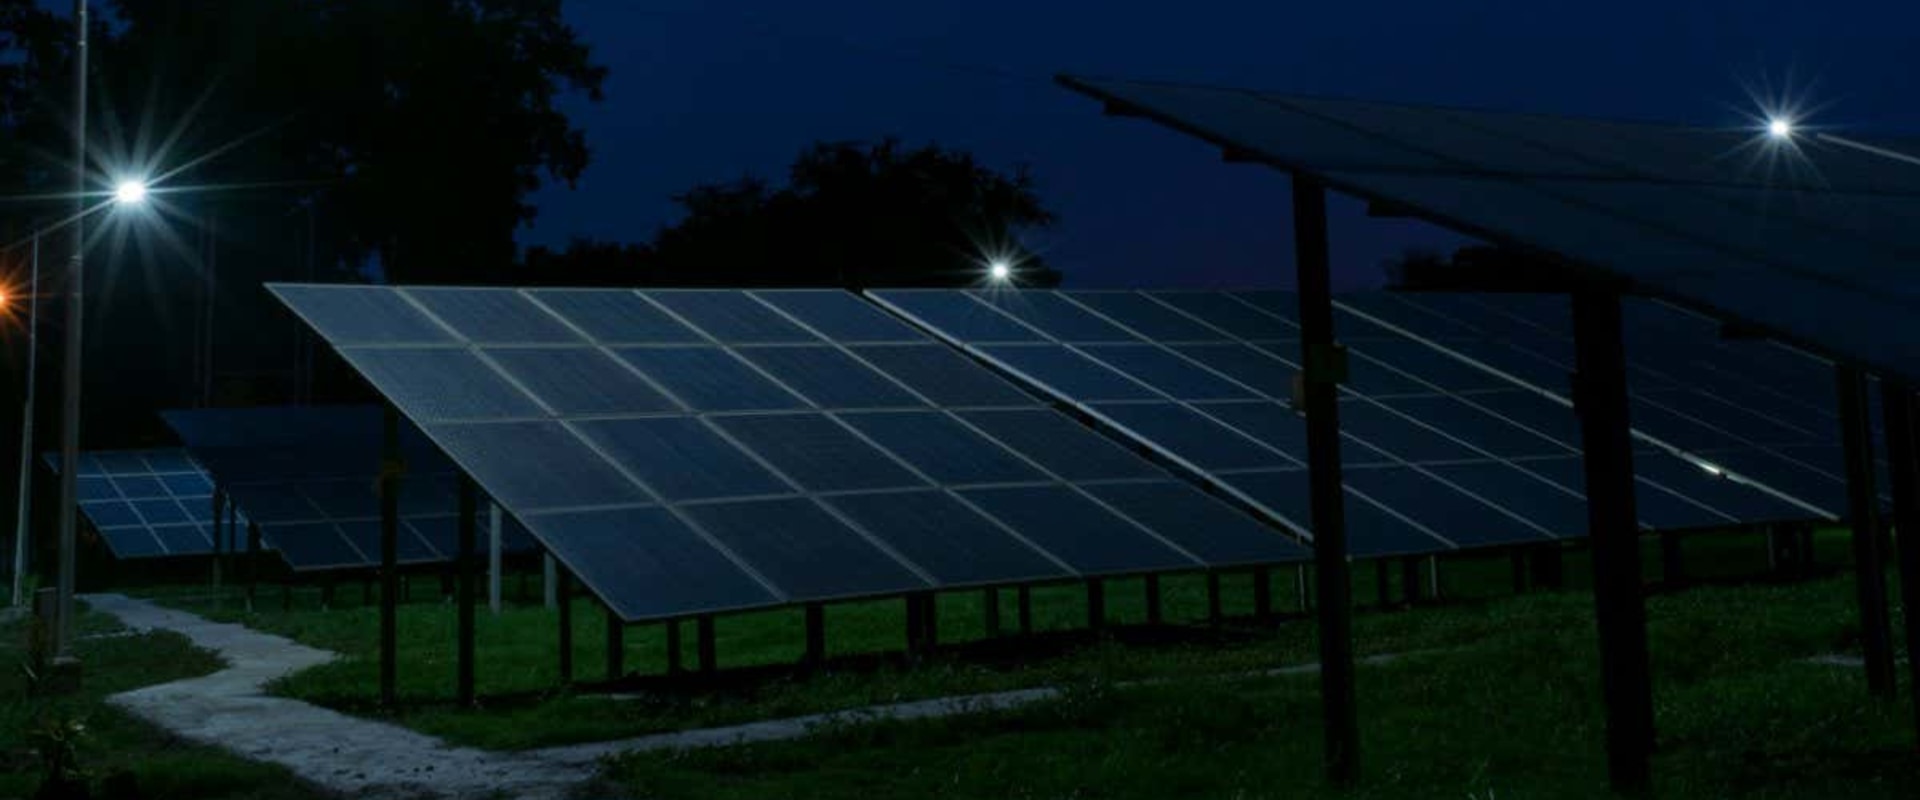 Can we get solar electricity at night when there is no sunlight?